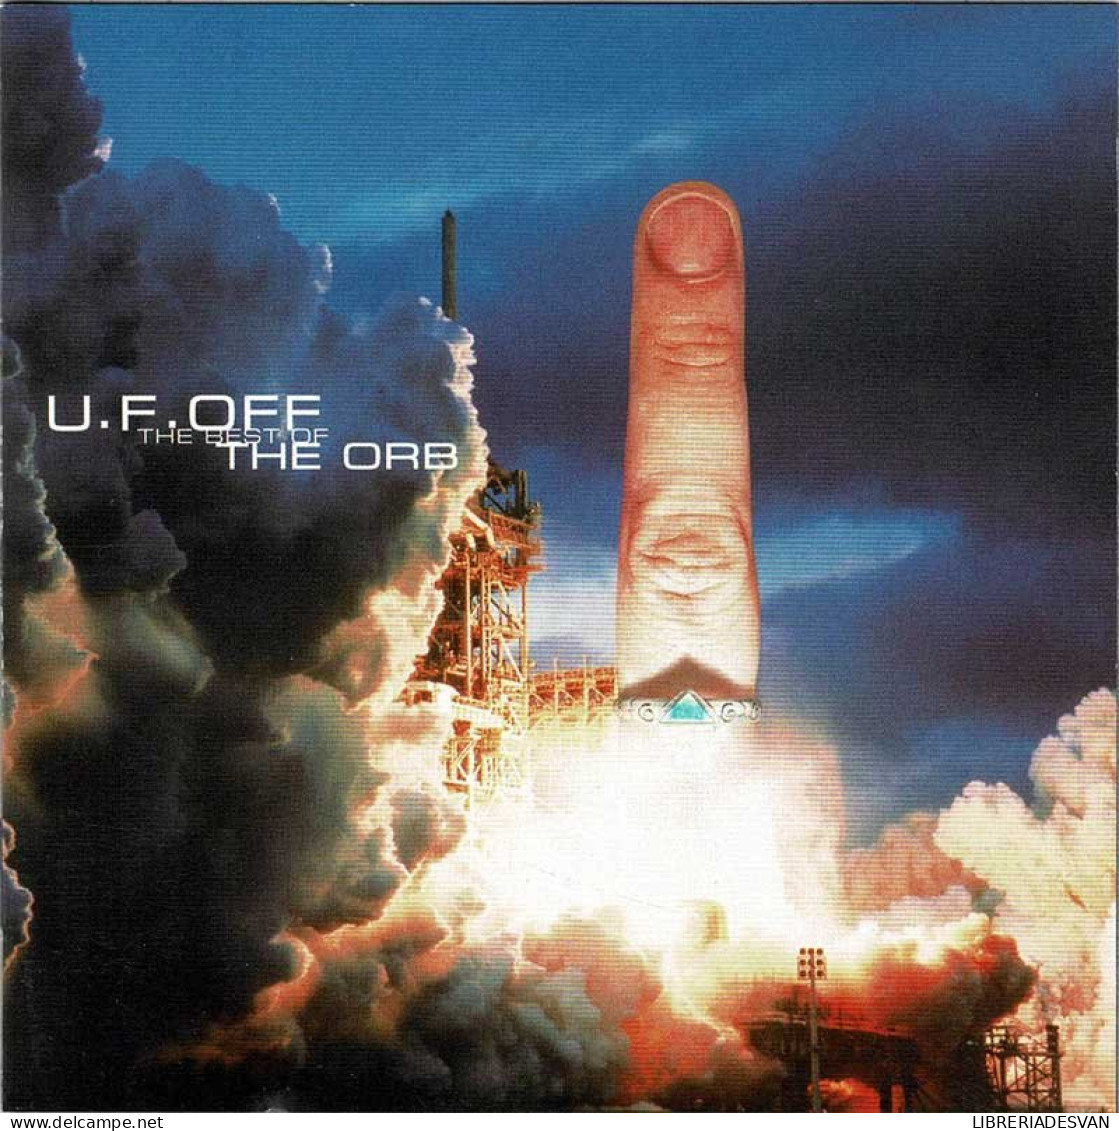 The Orb - U.F.OFF - The Best Of The Orb. CD - Dance, Techno & House